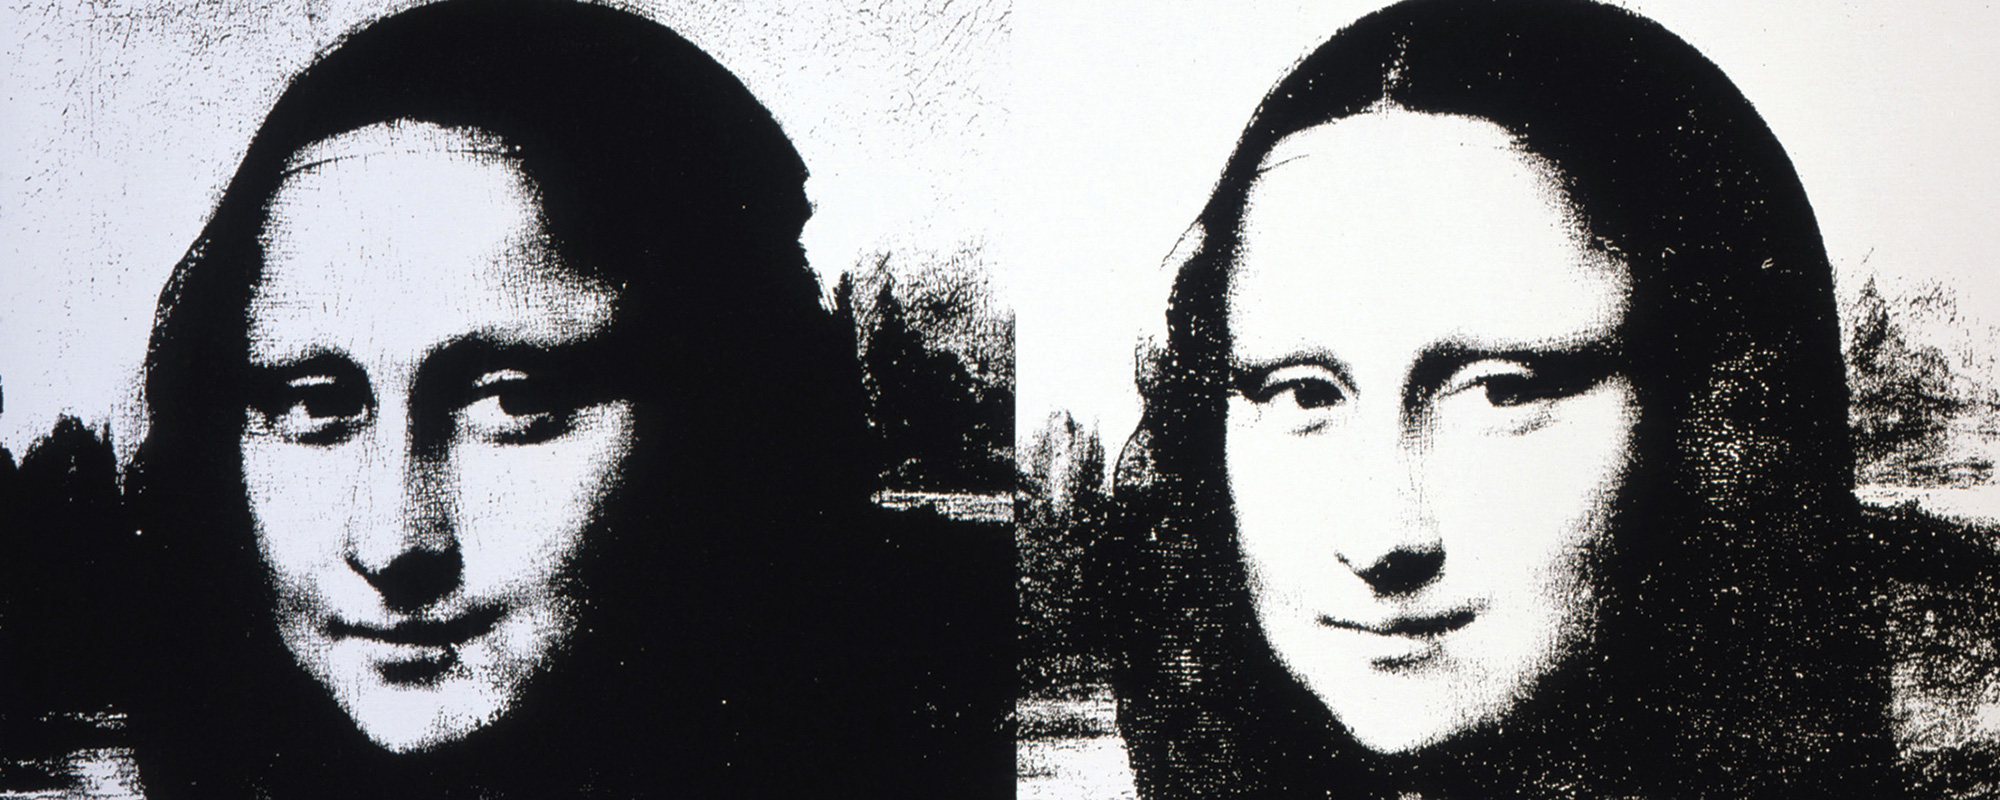 Andy Warhol's version of Mona Lisa. Two black and white images side by side.